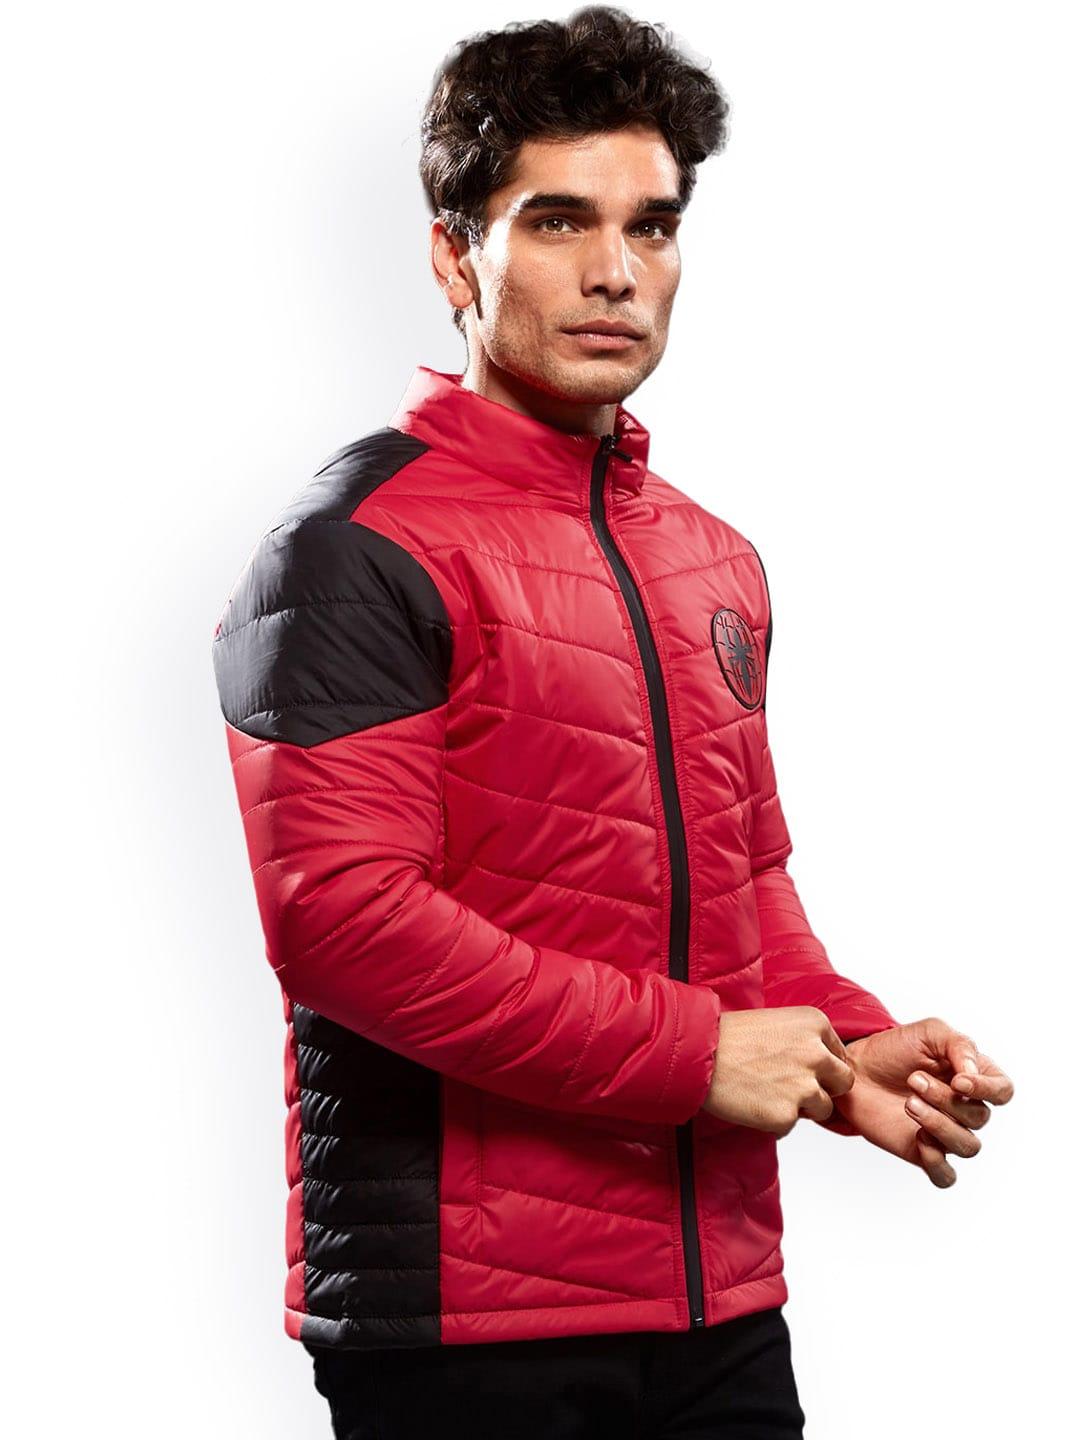 the-souled-store-men-red-&-black-lightweight-spider-man-padded-jacket